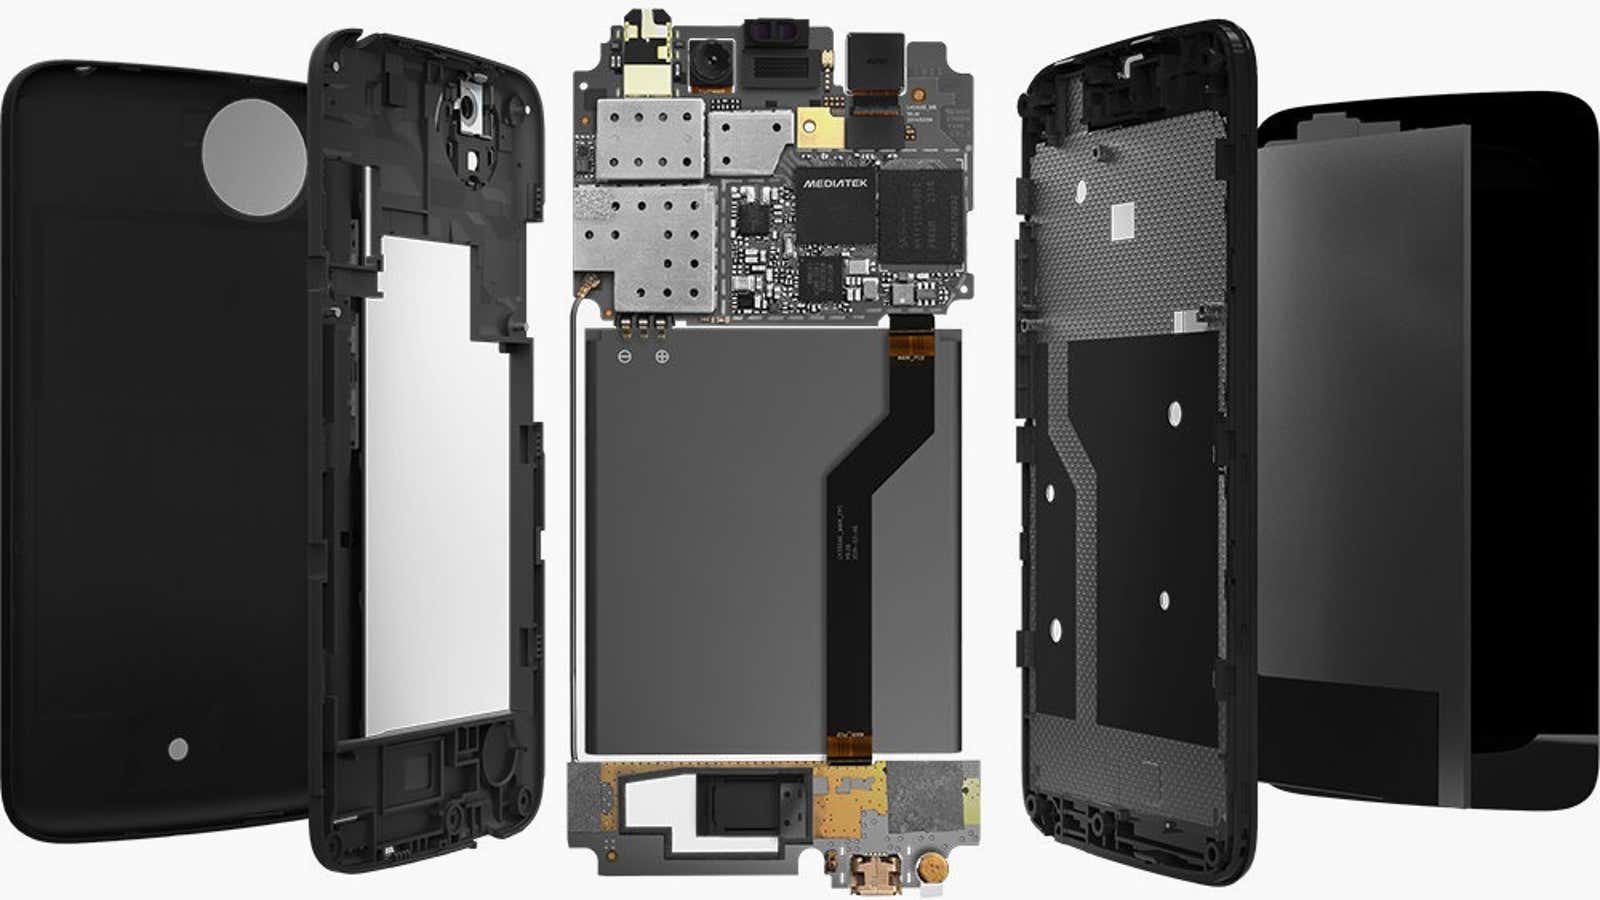 Inside the Android One.